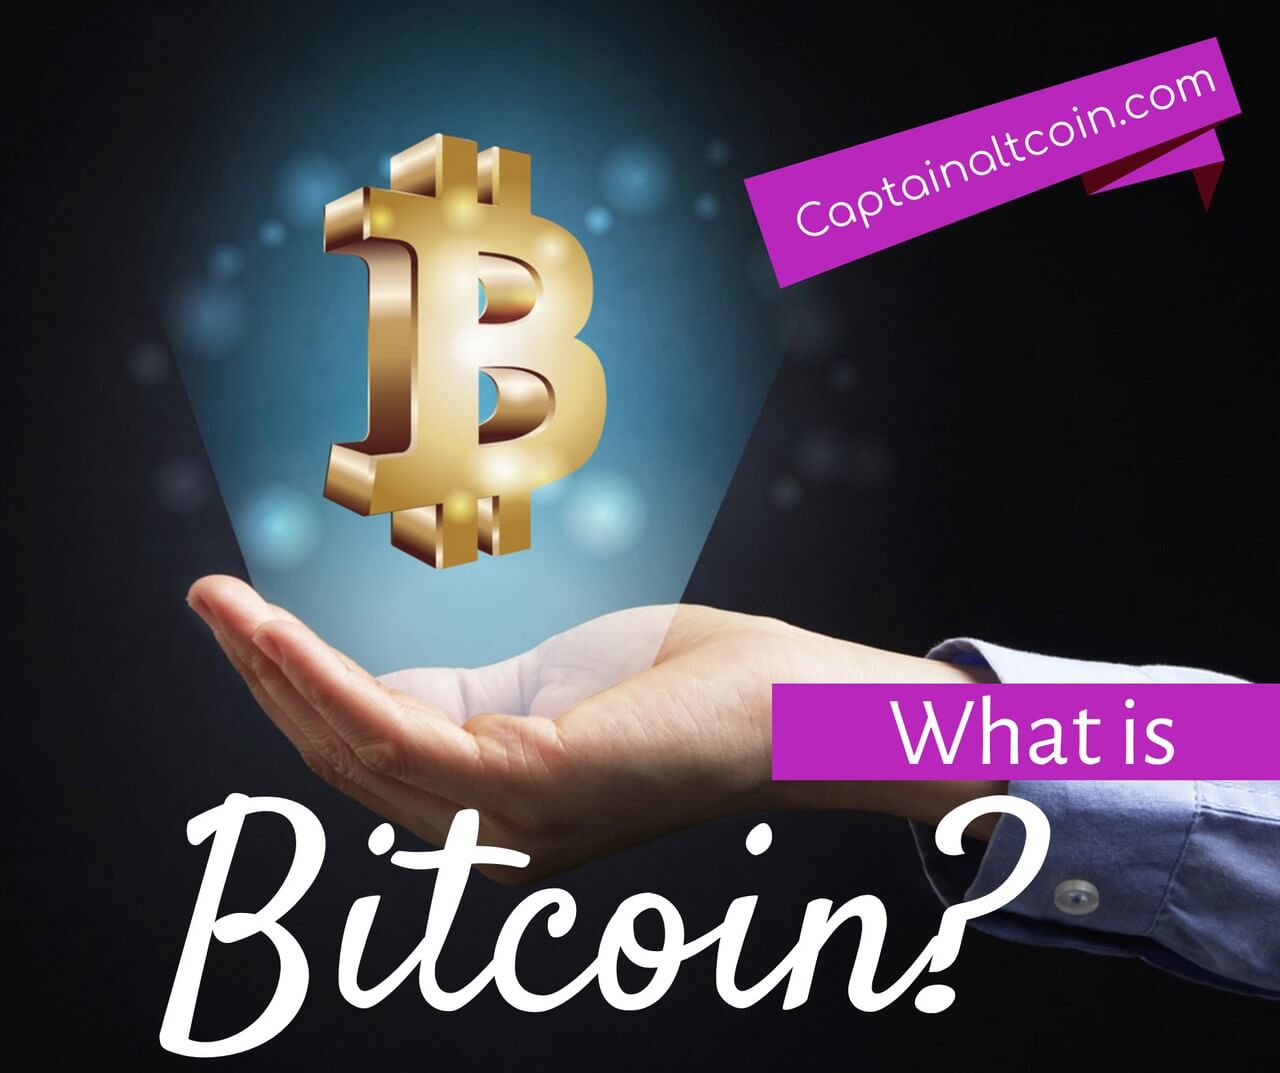 What is Bitcoin? | CaptainAltcoin